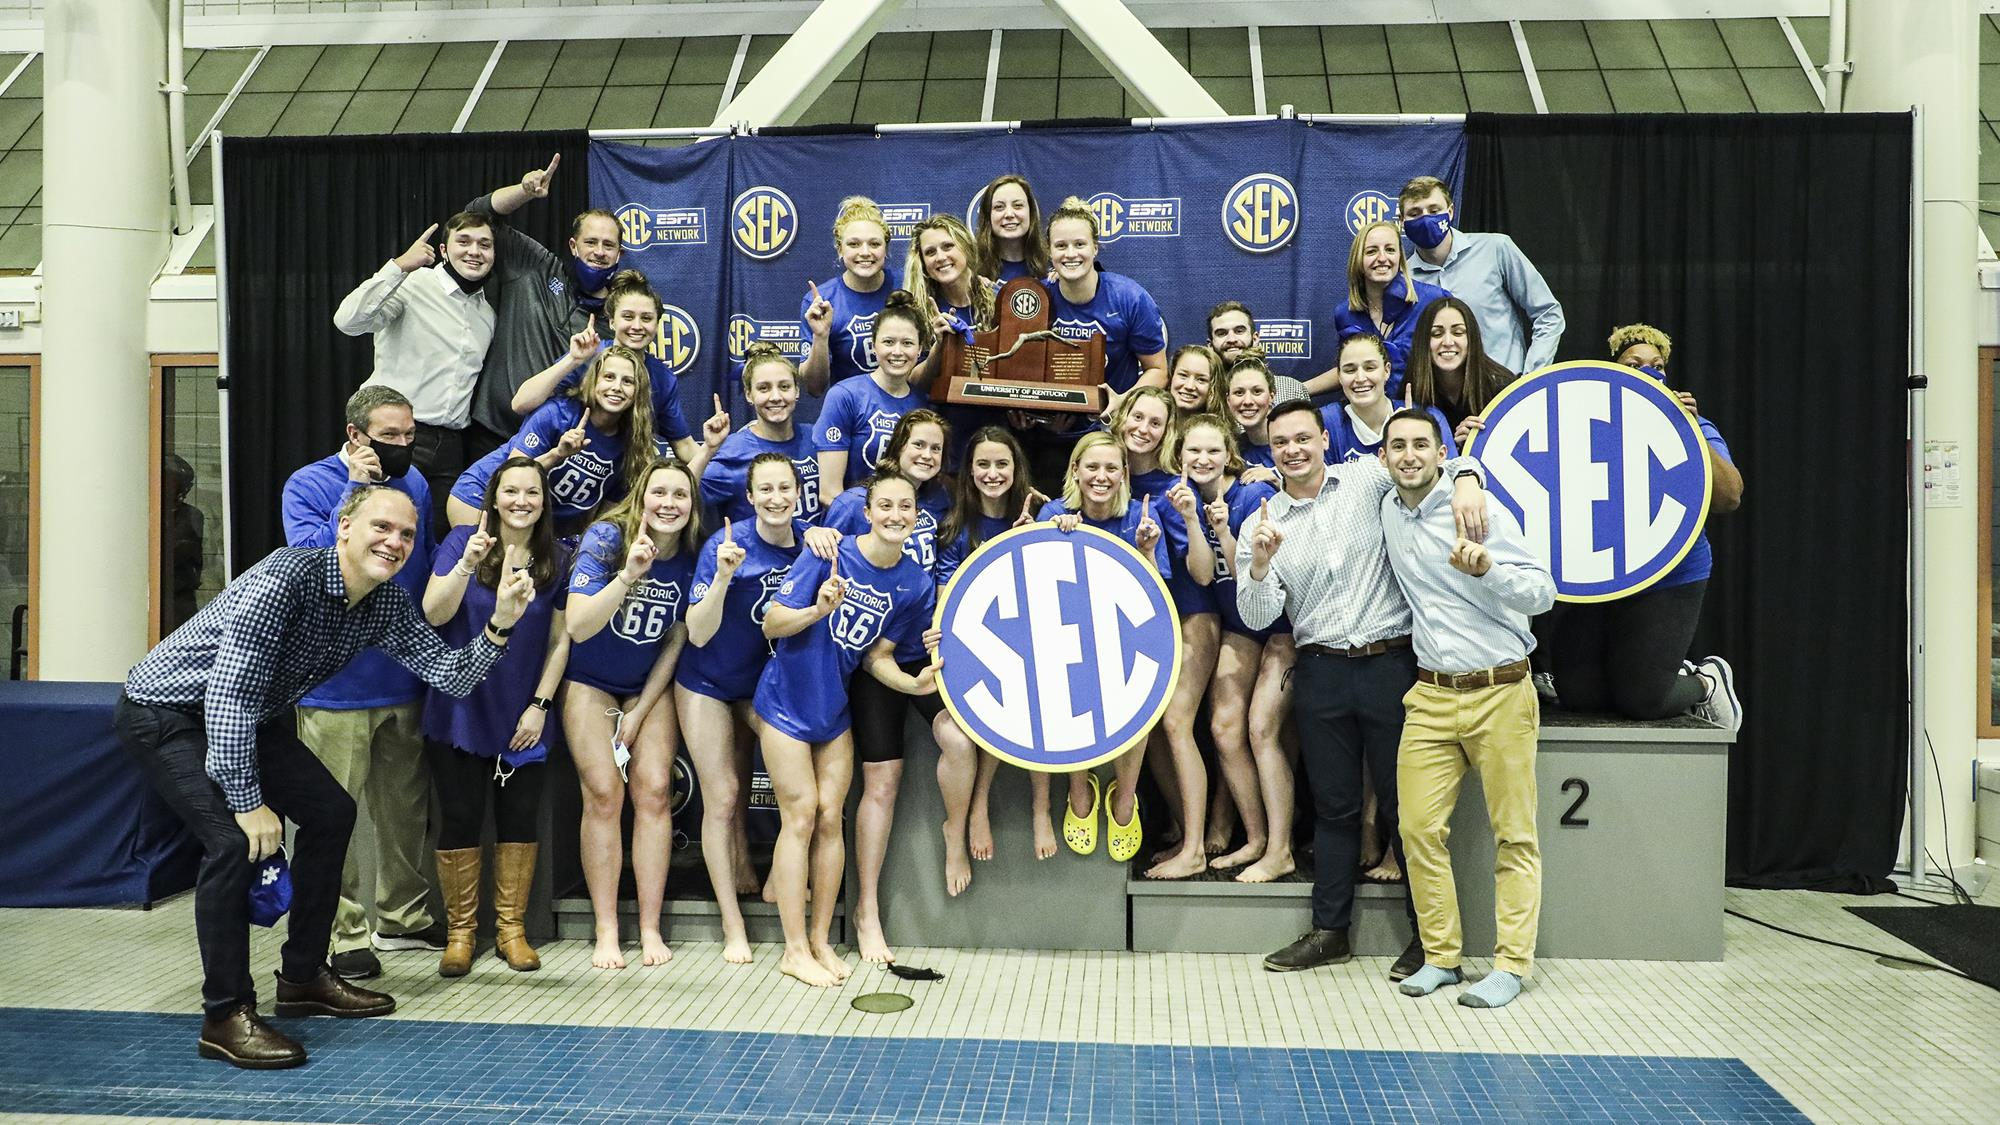 Gaines, UK Women's Swimming & Diving Team Hoping to Make History